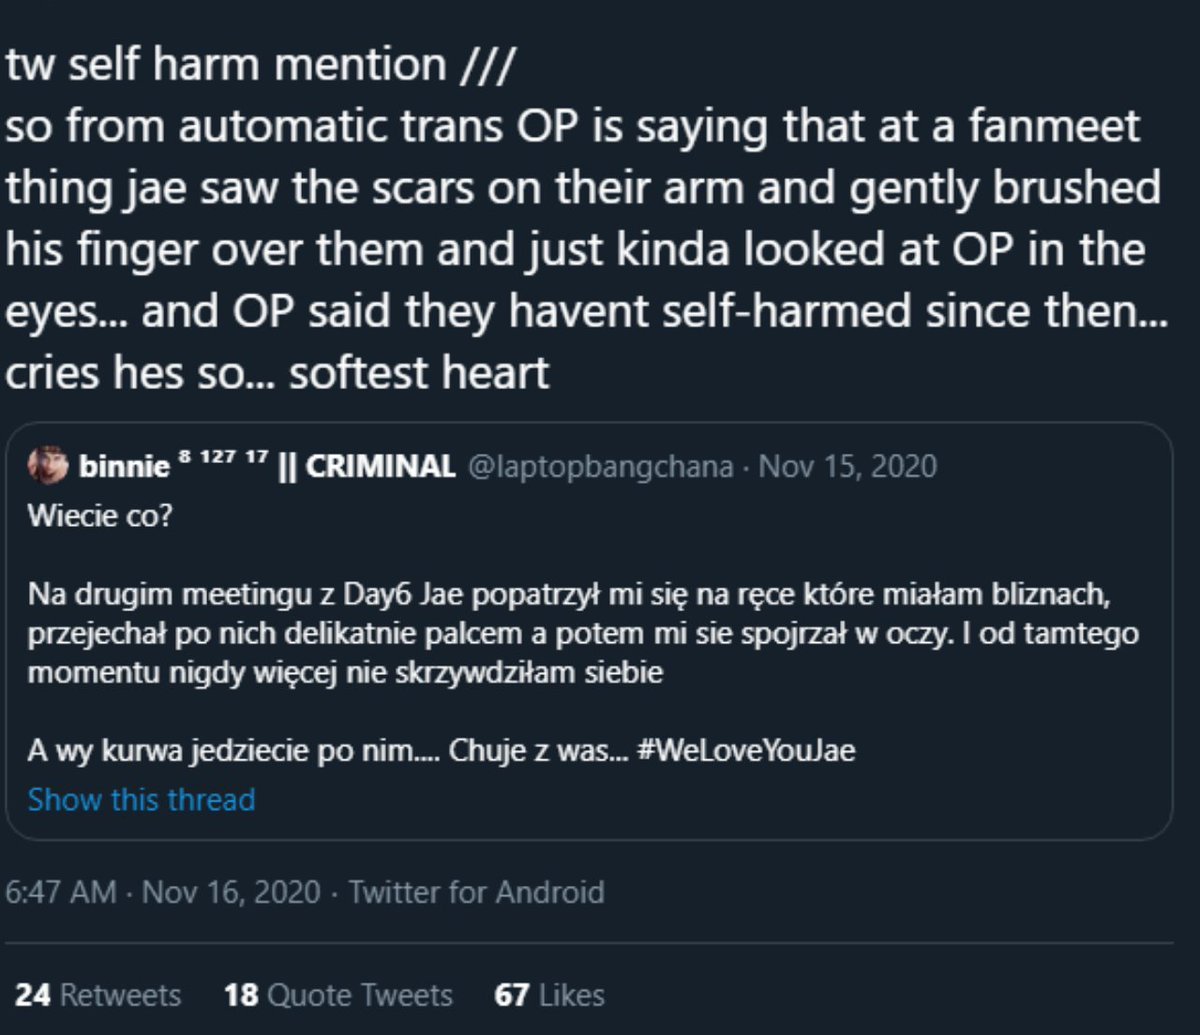 tw // self harm mentionduring a fansign jae saw op's selfharm scars and looked them in the eyes and gently ran his fingers over them and op said they havent self harmed since